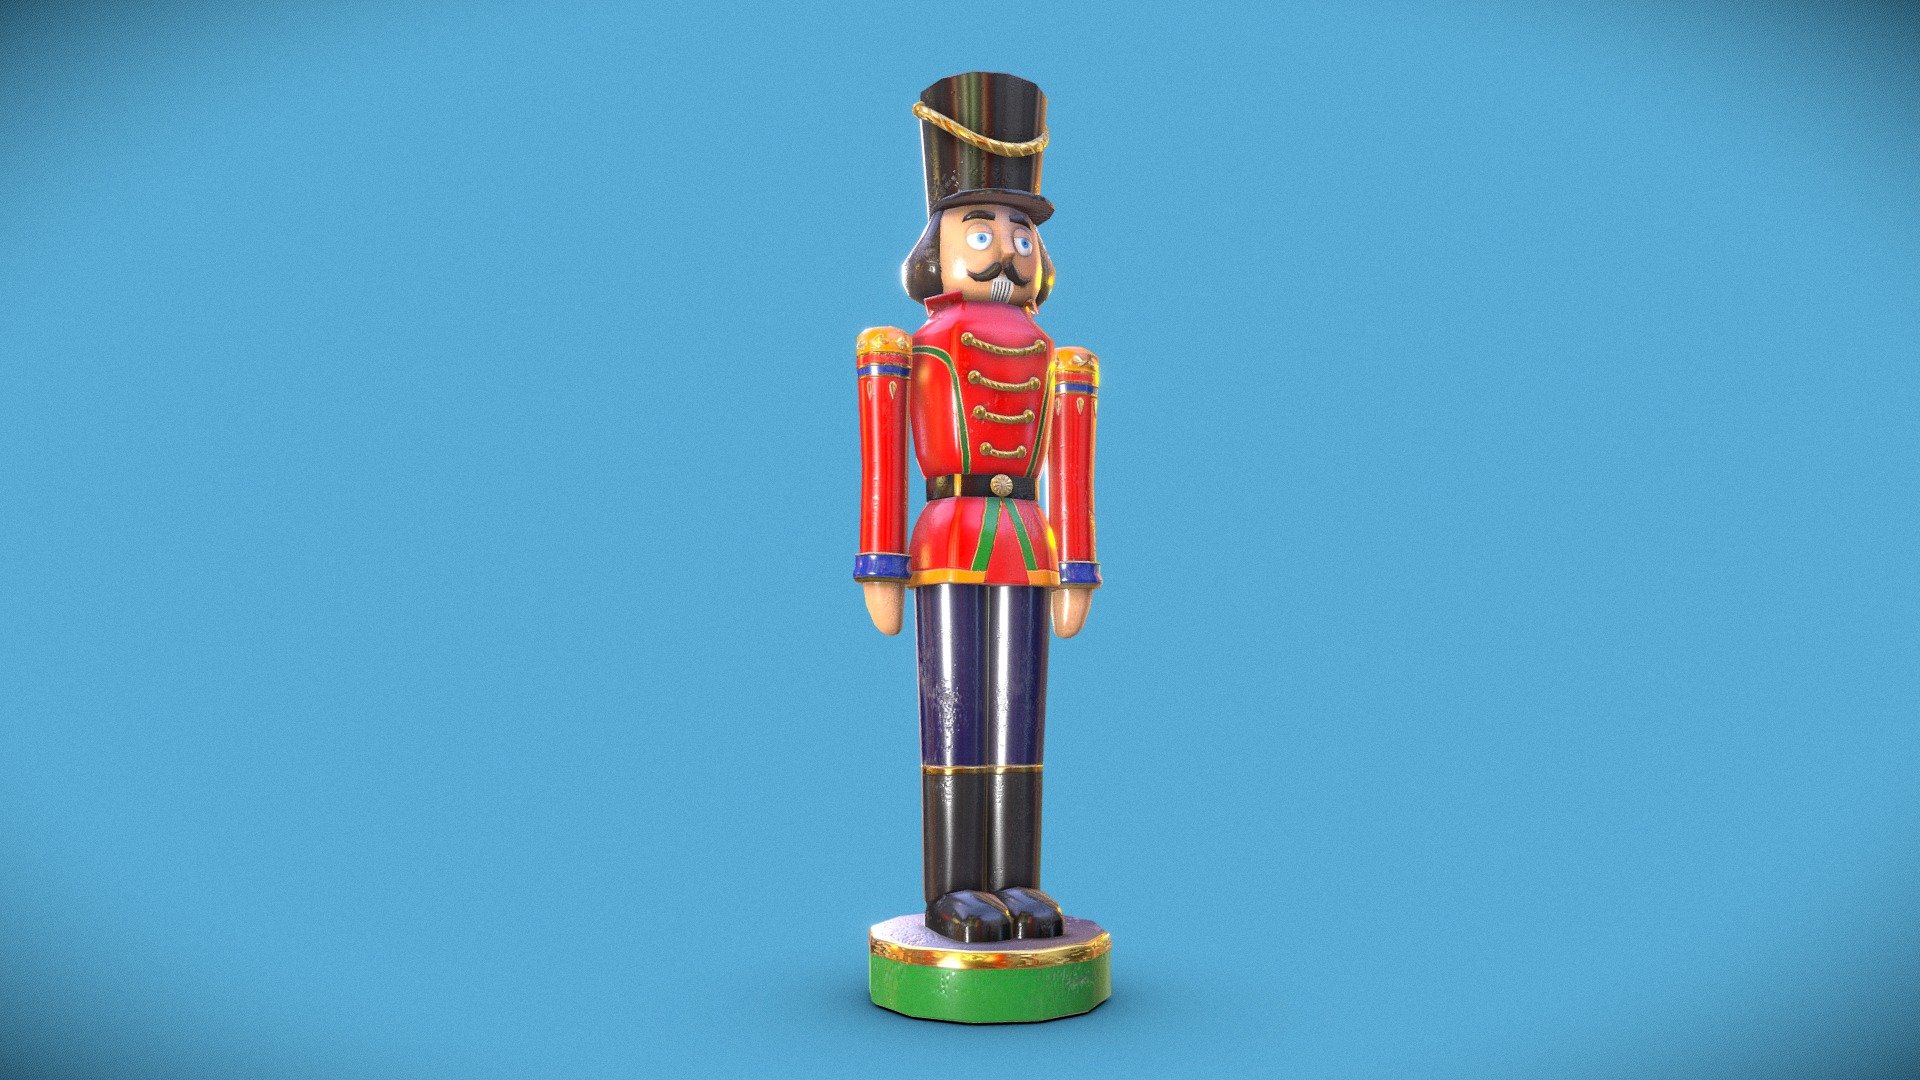 A NutCraker Toy low poly
Modeled with Maya
Textures made with Substance Painter - NutCracker - Toy - 3D model by Melissa Descubes (@Melissadescubes) 3d model